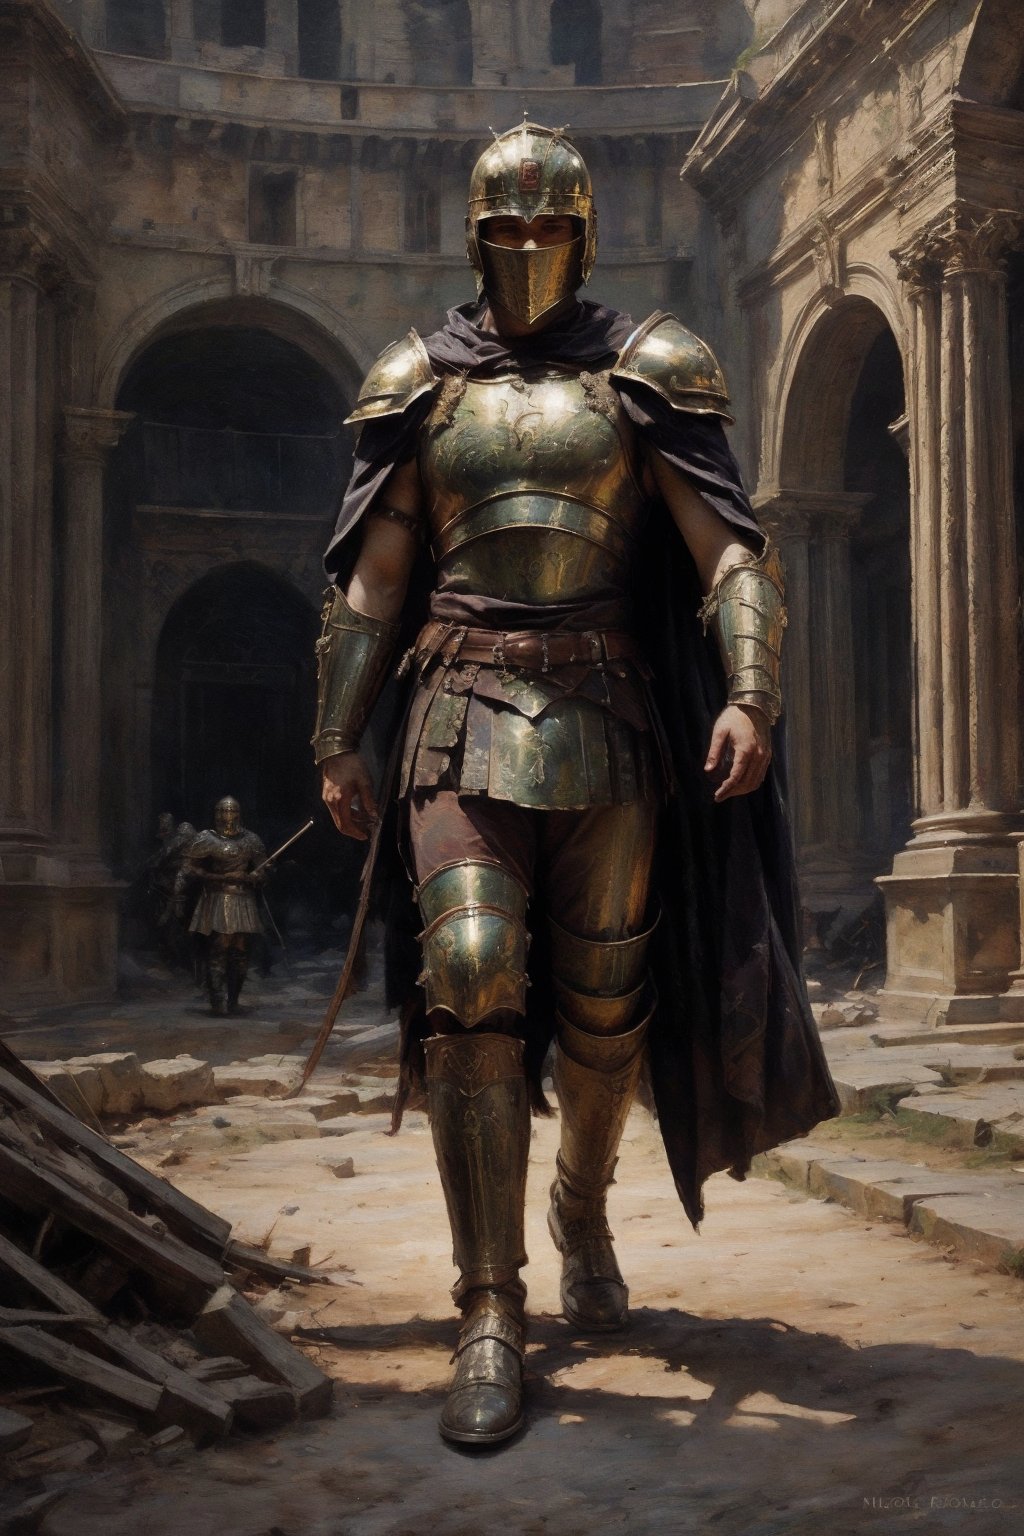 , ultra high resolution, 8k, masterpiece UHD, unparalleled masterpiece, ultra realistic 8K, 
Atmospheric perspective. Full body shot, a a roman gladiator, cape gladiator helmet, cape, megestic gladiator in Colosseum Golden armour ,,in a roman arena, dedly fight, fighters background ,    ,, highly detaild,,  , detaild background,,moss,vains,aincent ruins,Colosseum background,  intricate details, concept art,in the style of nicola samori,